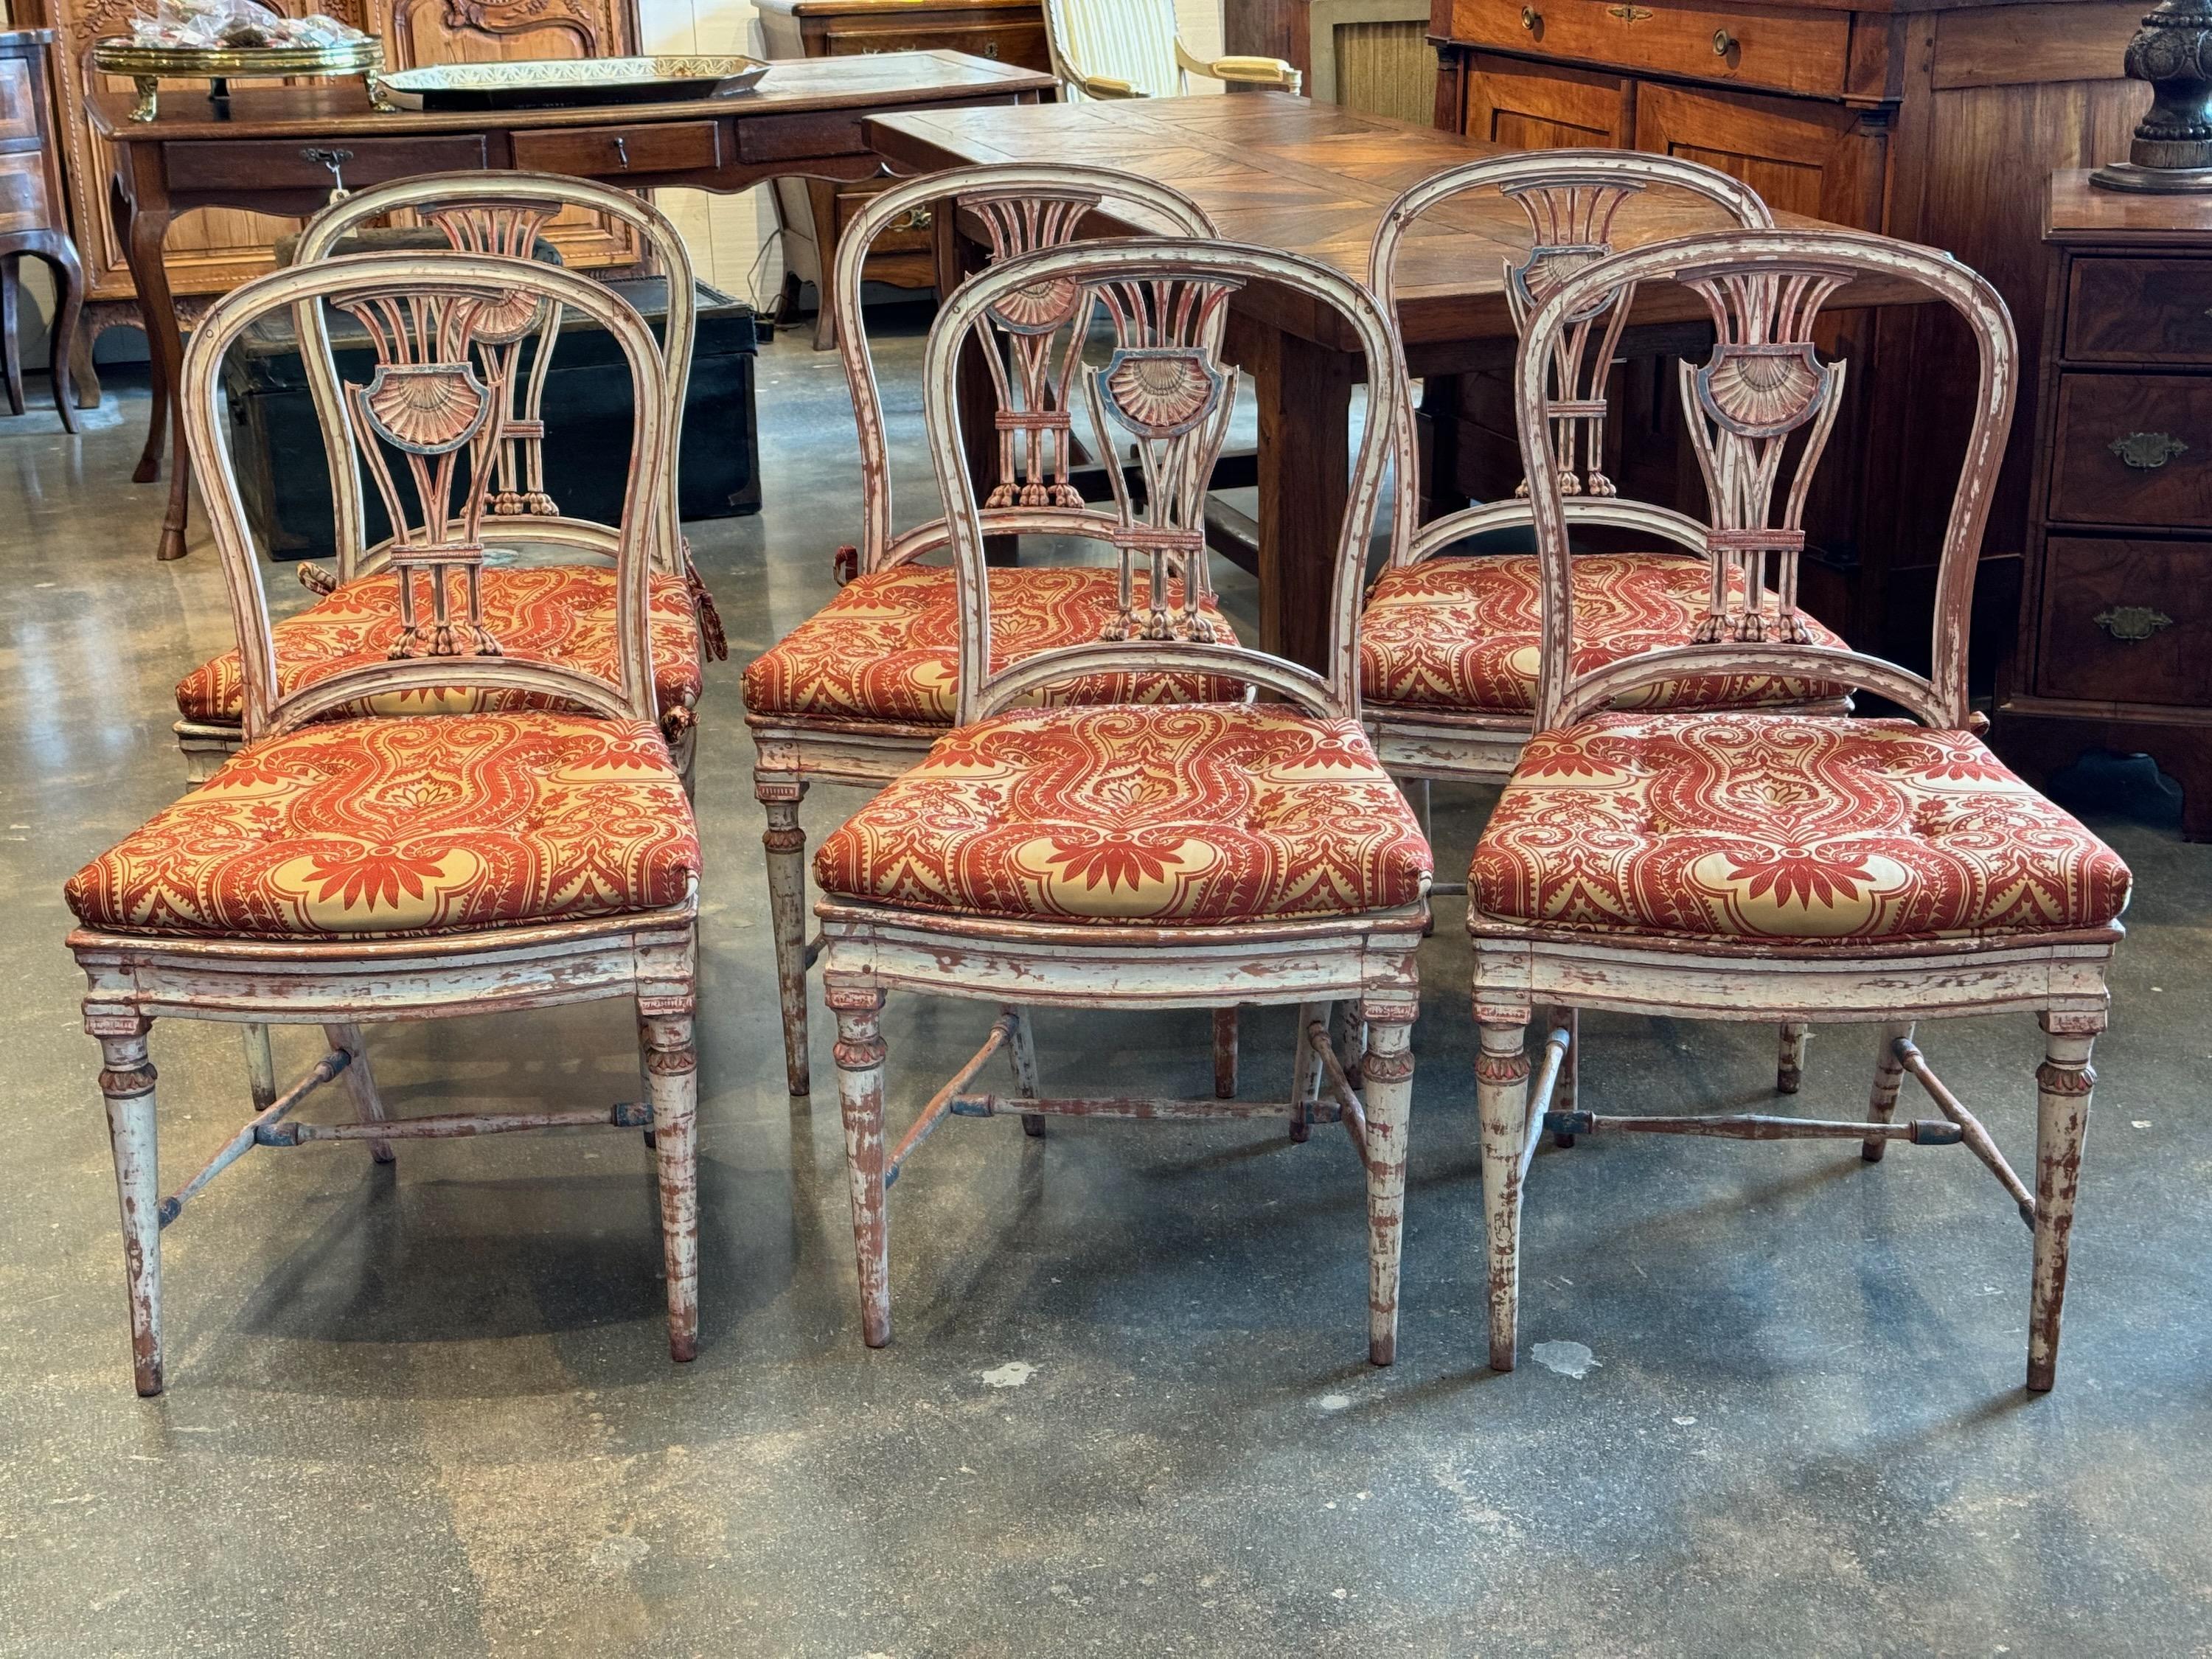 The prettiest chairs we have had in a long time. Beautiful paint decoration with caned seats and cushions .